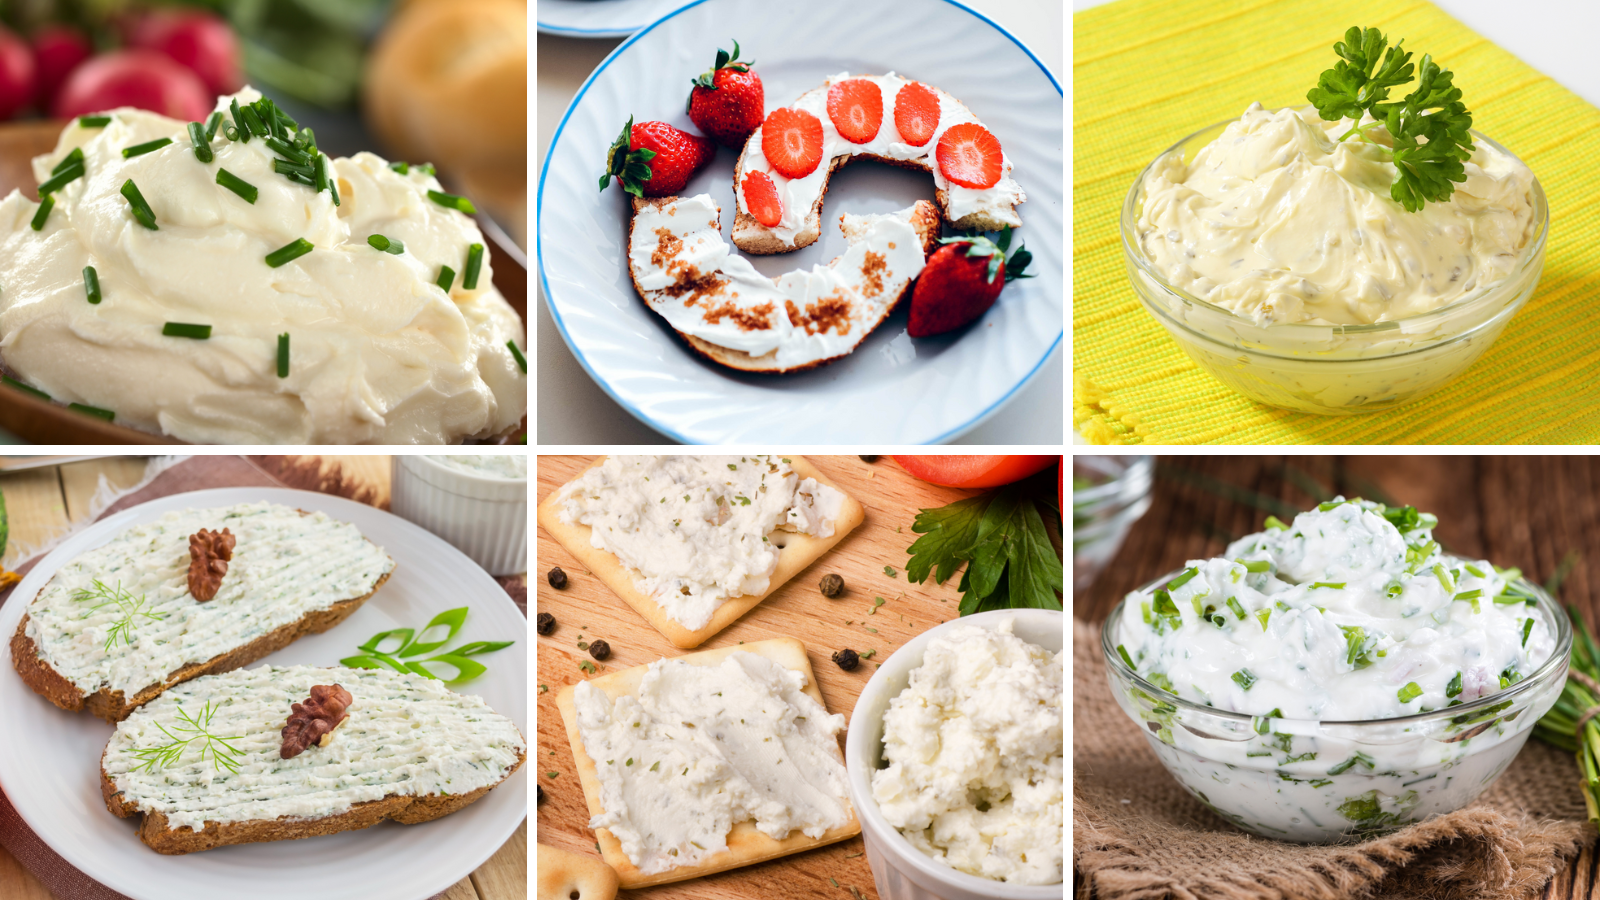 Best Vegan Cream Cheese Recipes For Your Kids